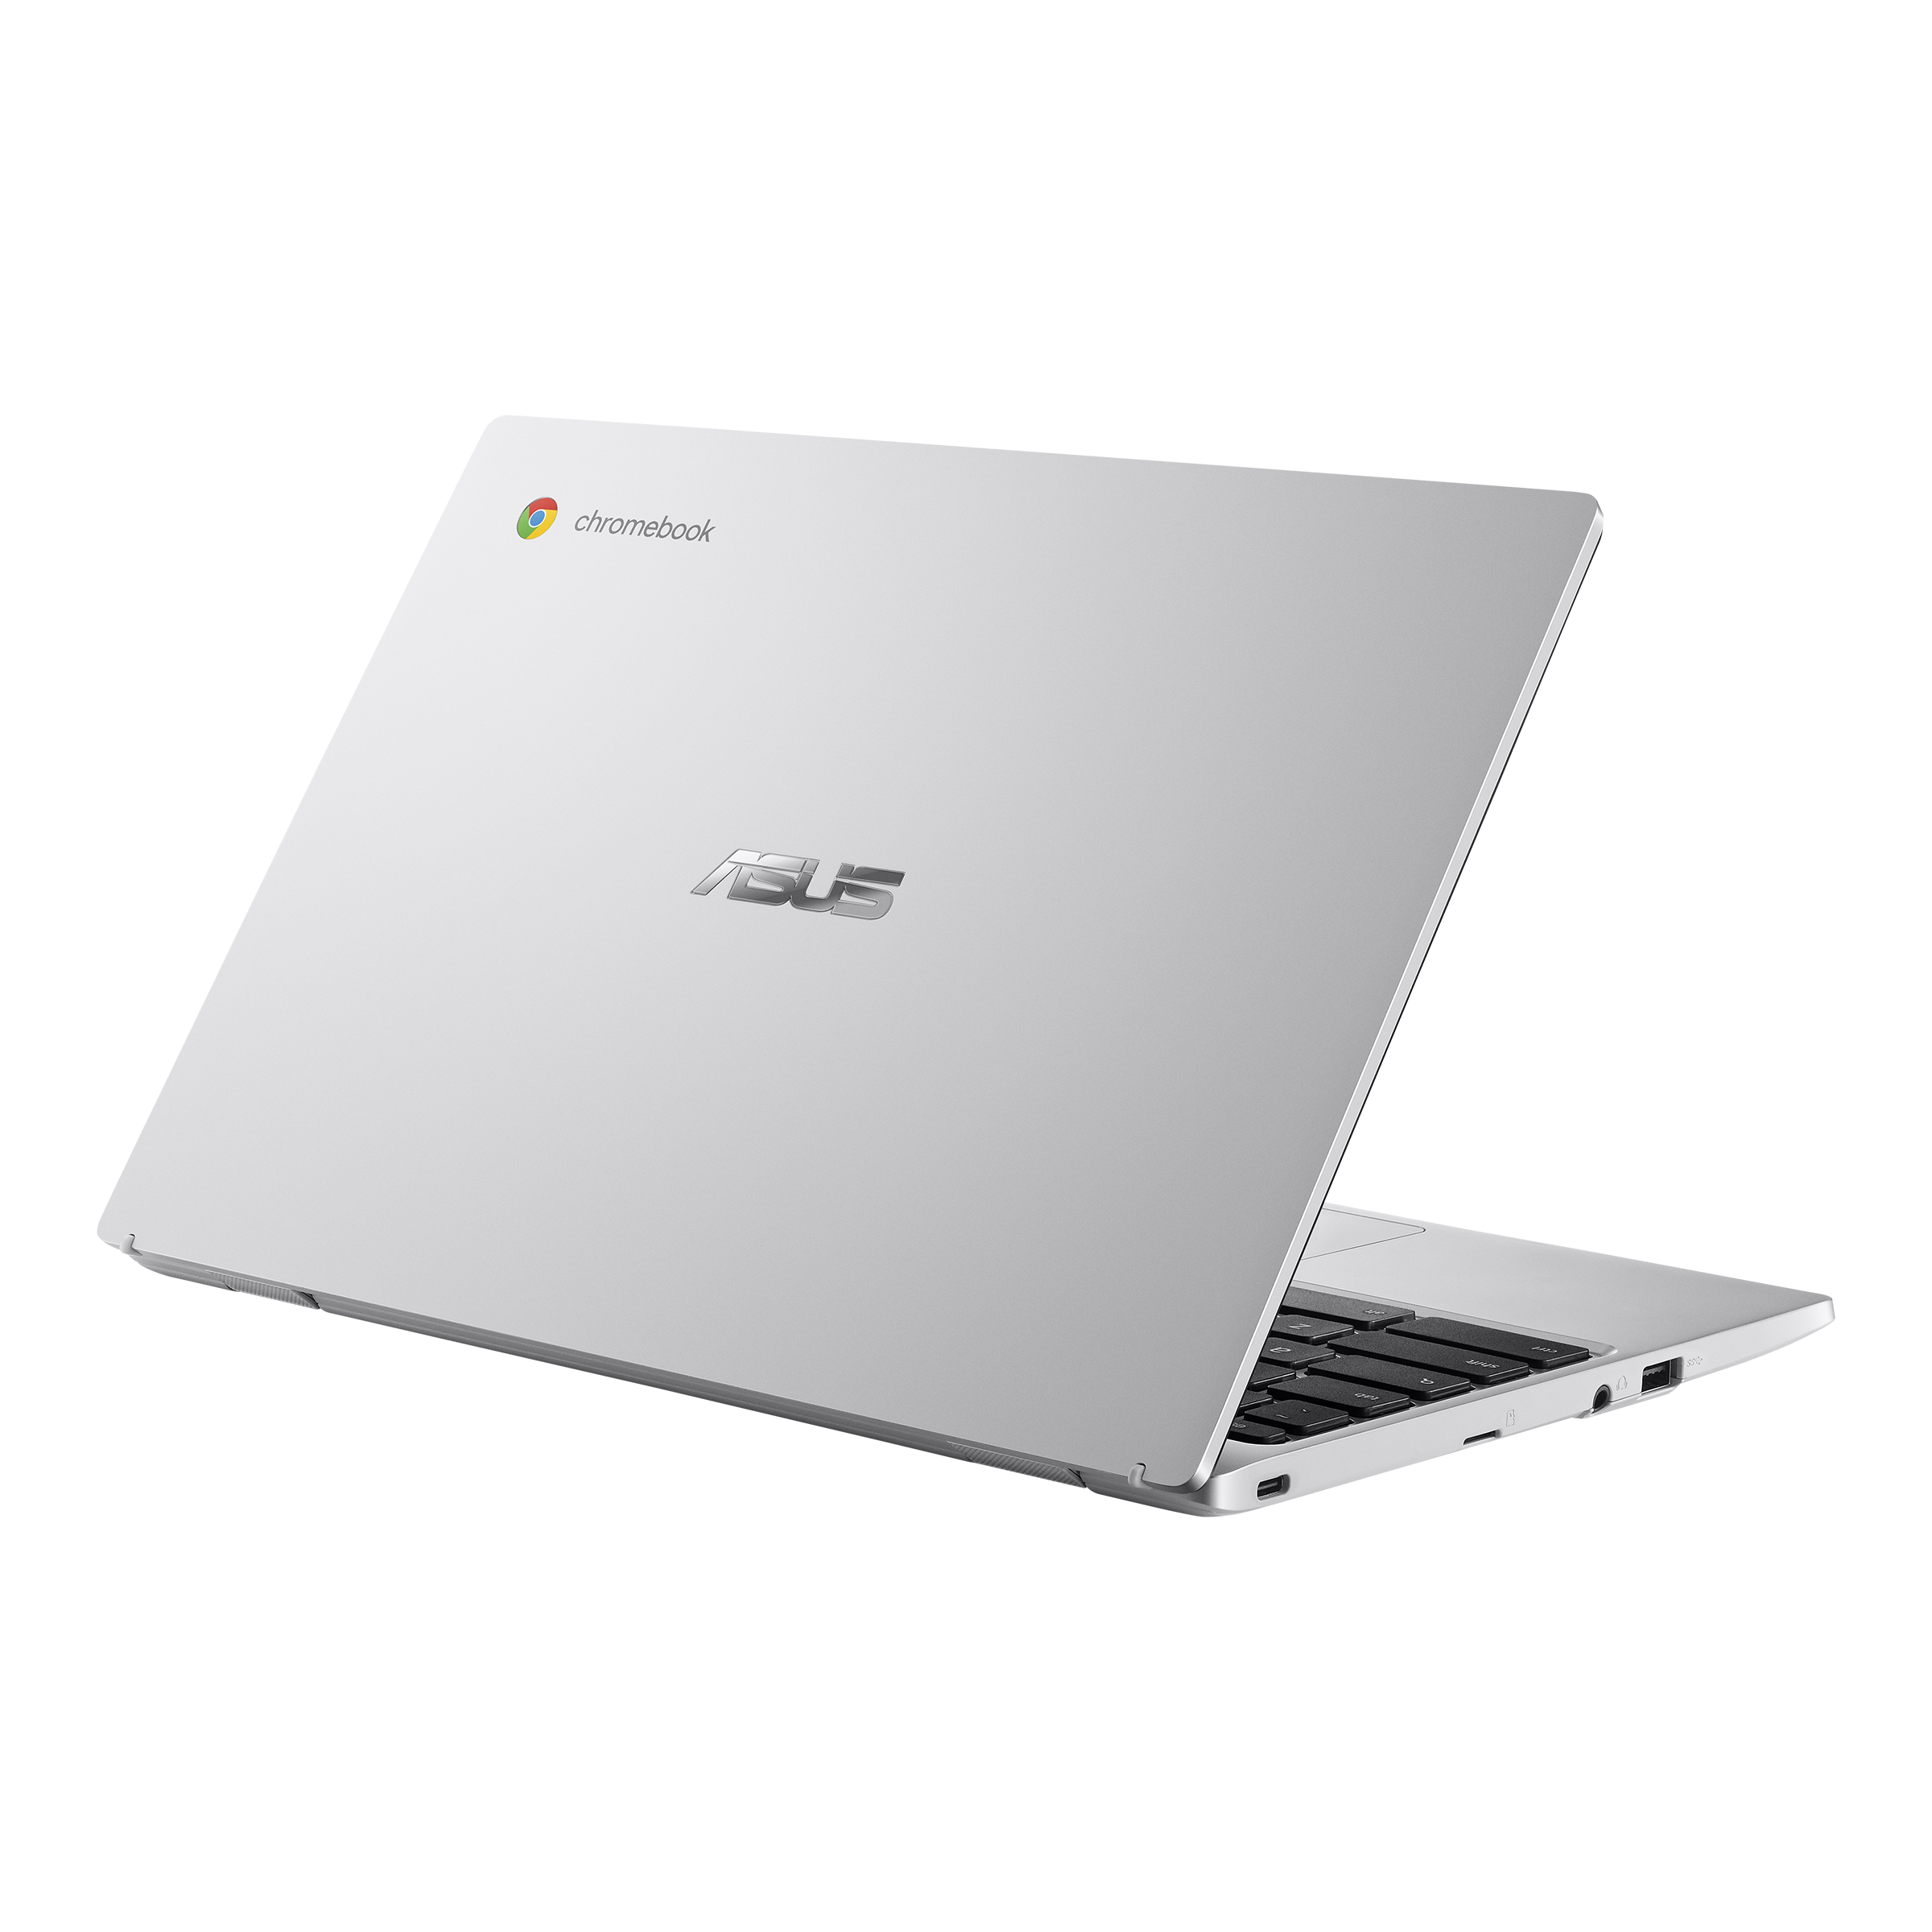 ASUS Chromebook CX1 (CX1101)｜Laptops For Home｜ASUS Canada